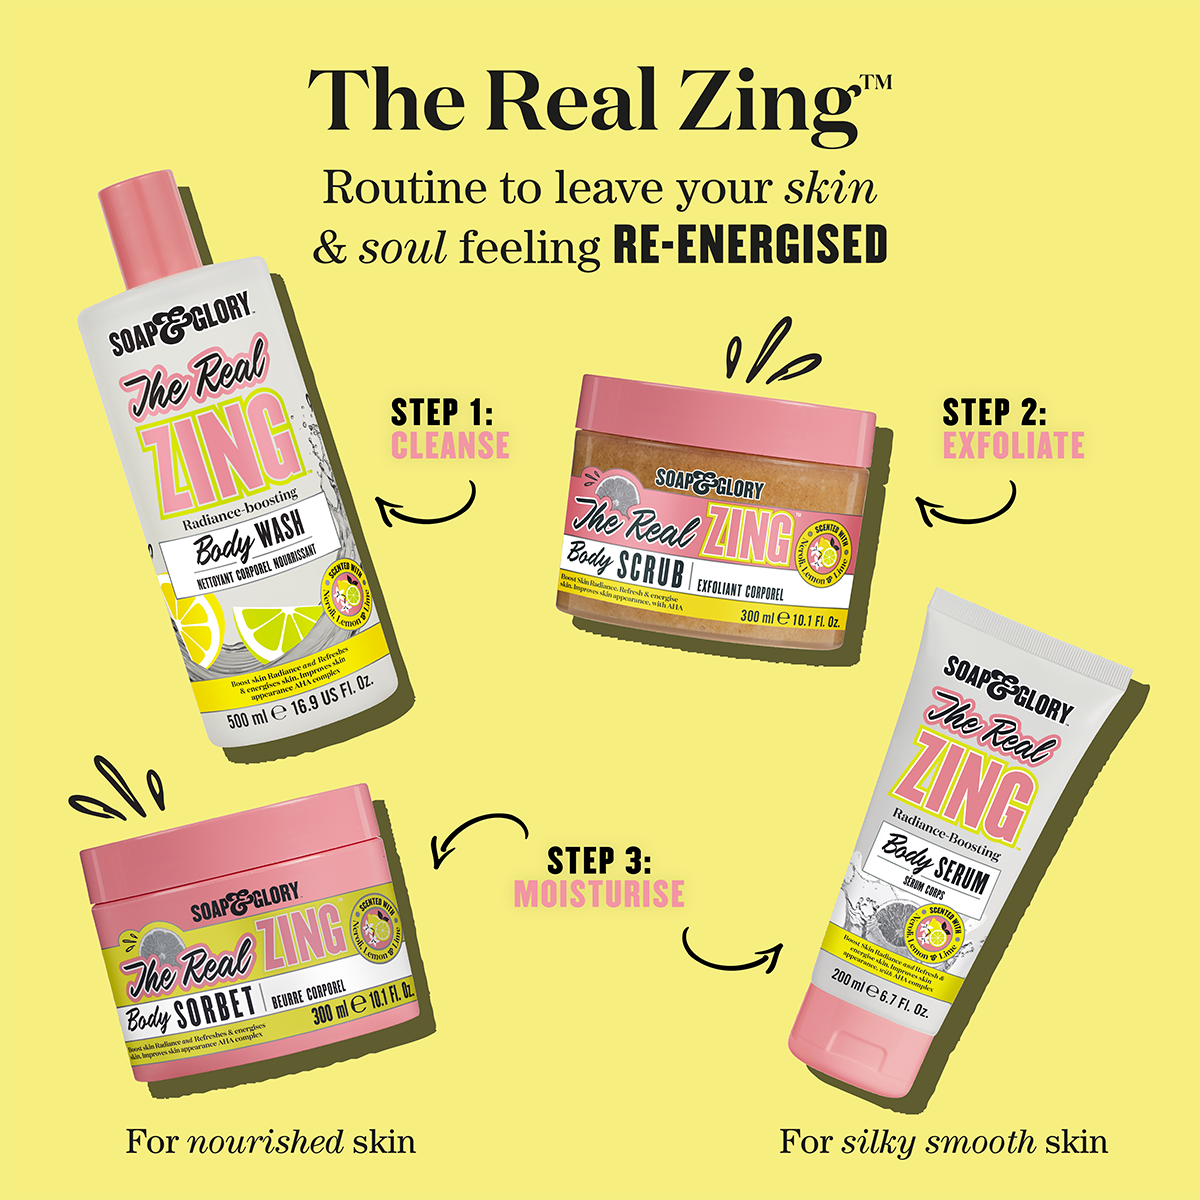 The Real Zing Body Care Routine